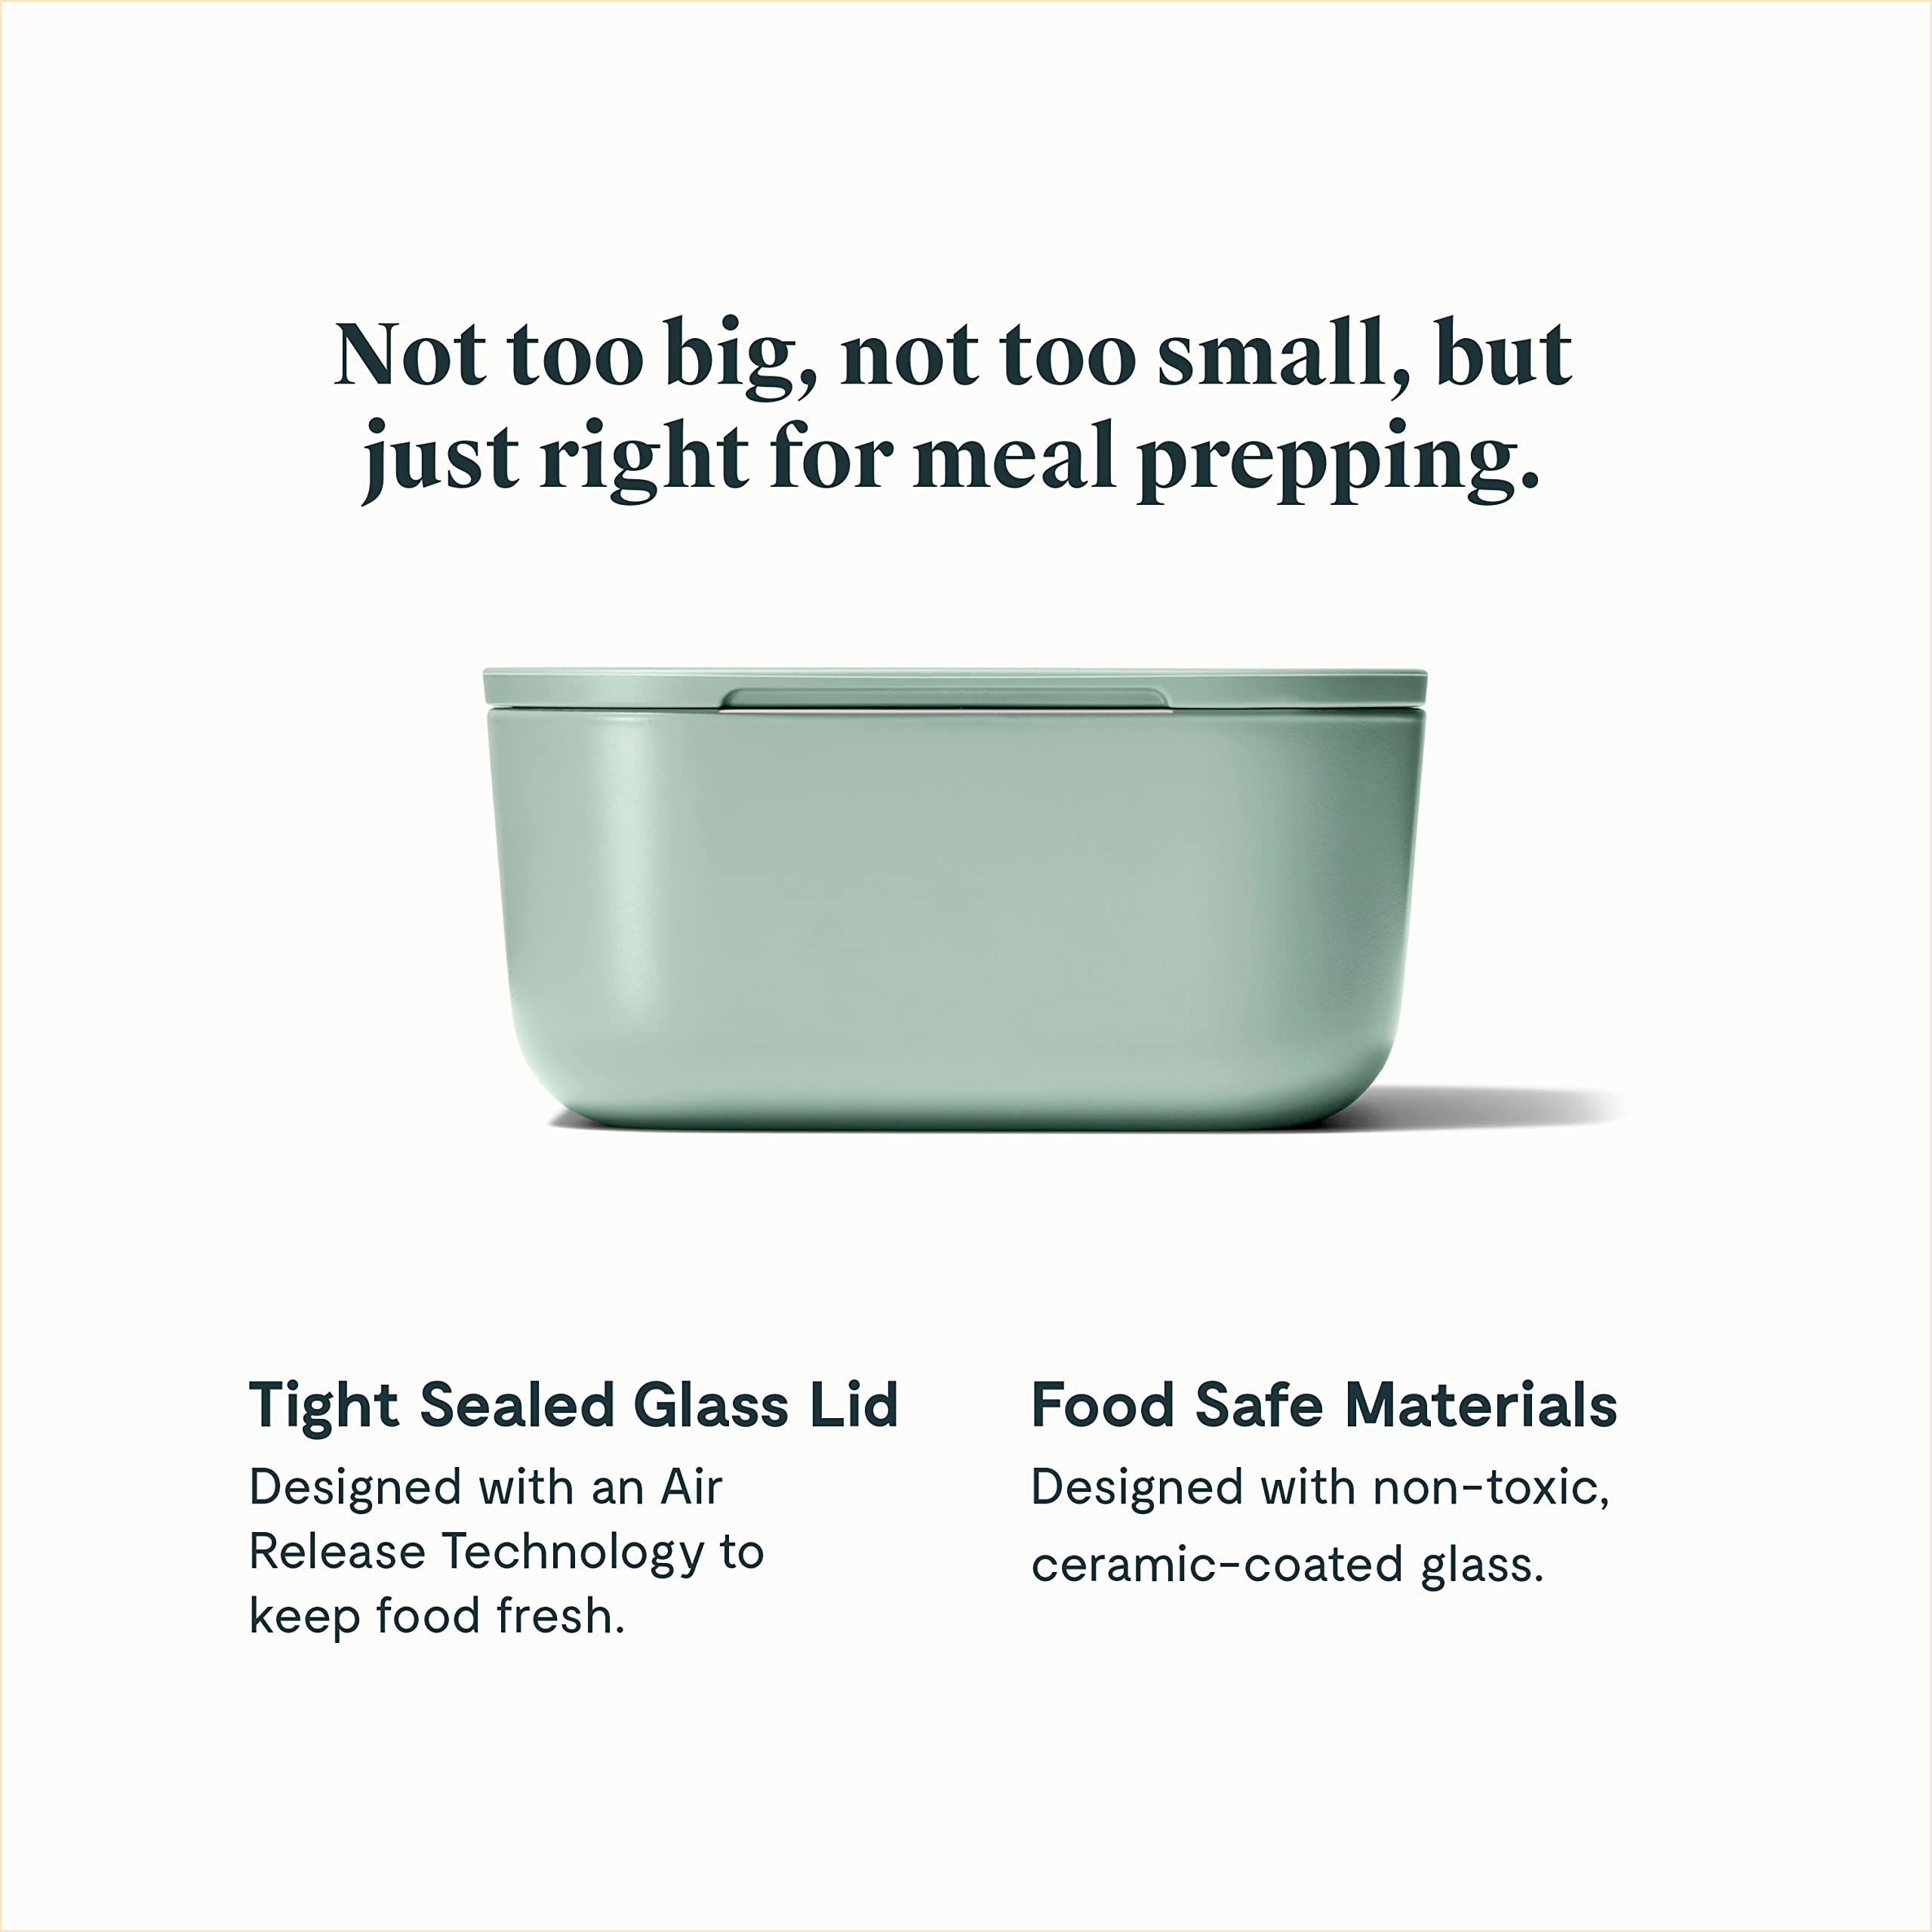 Caraway Glass Food Storage - 6.6 Cup Glass Container - Ceramic Coated Food Container - Non Toxic, Non Stick Lunch Box Container with Glass Lids. Dishwasher, Oven, & Microwave Safe - Mist